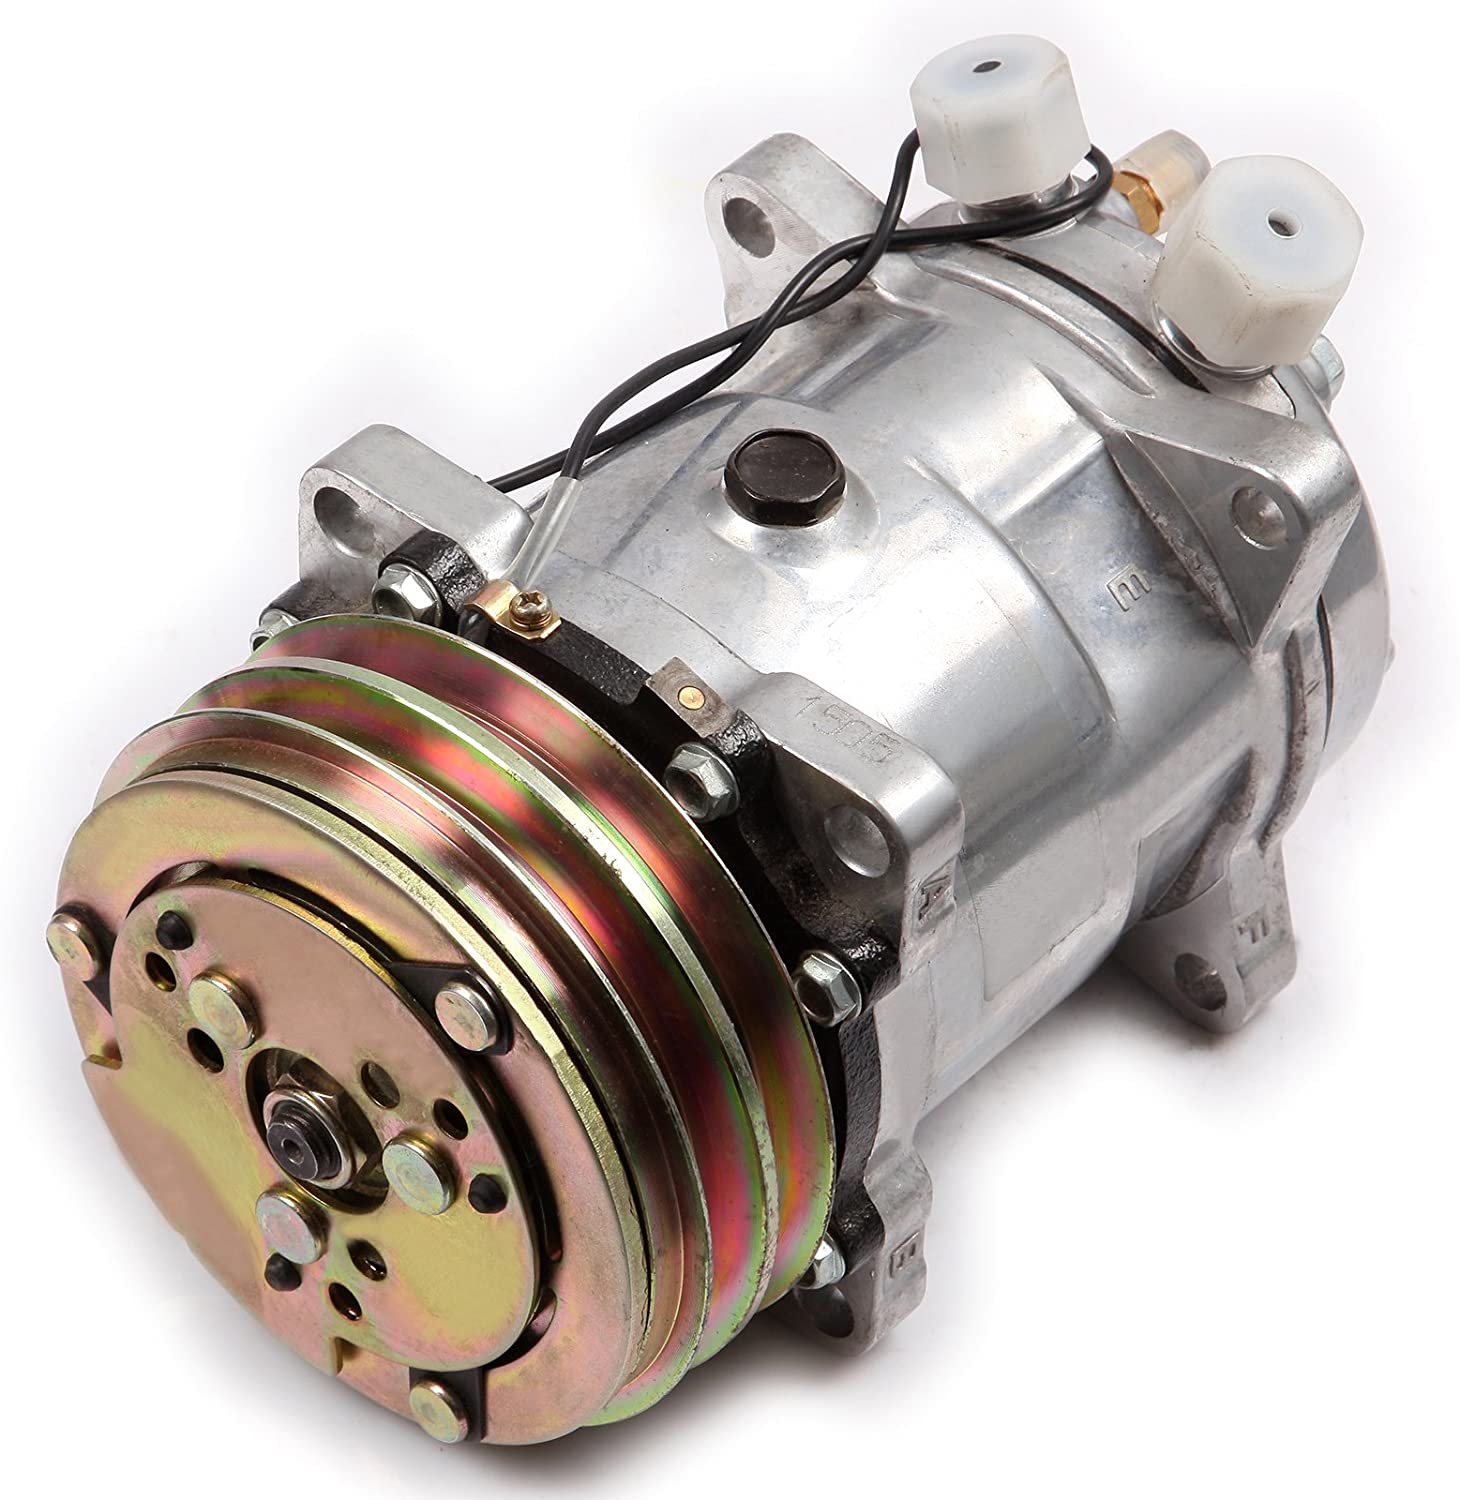 ECCPP Compatible with AC Compressor with Clutch for CO 9285C 1989-1990 J-eep Wrangler 2.5L 1987-1990 J-eep Wrangler 4.2L